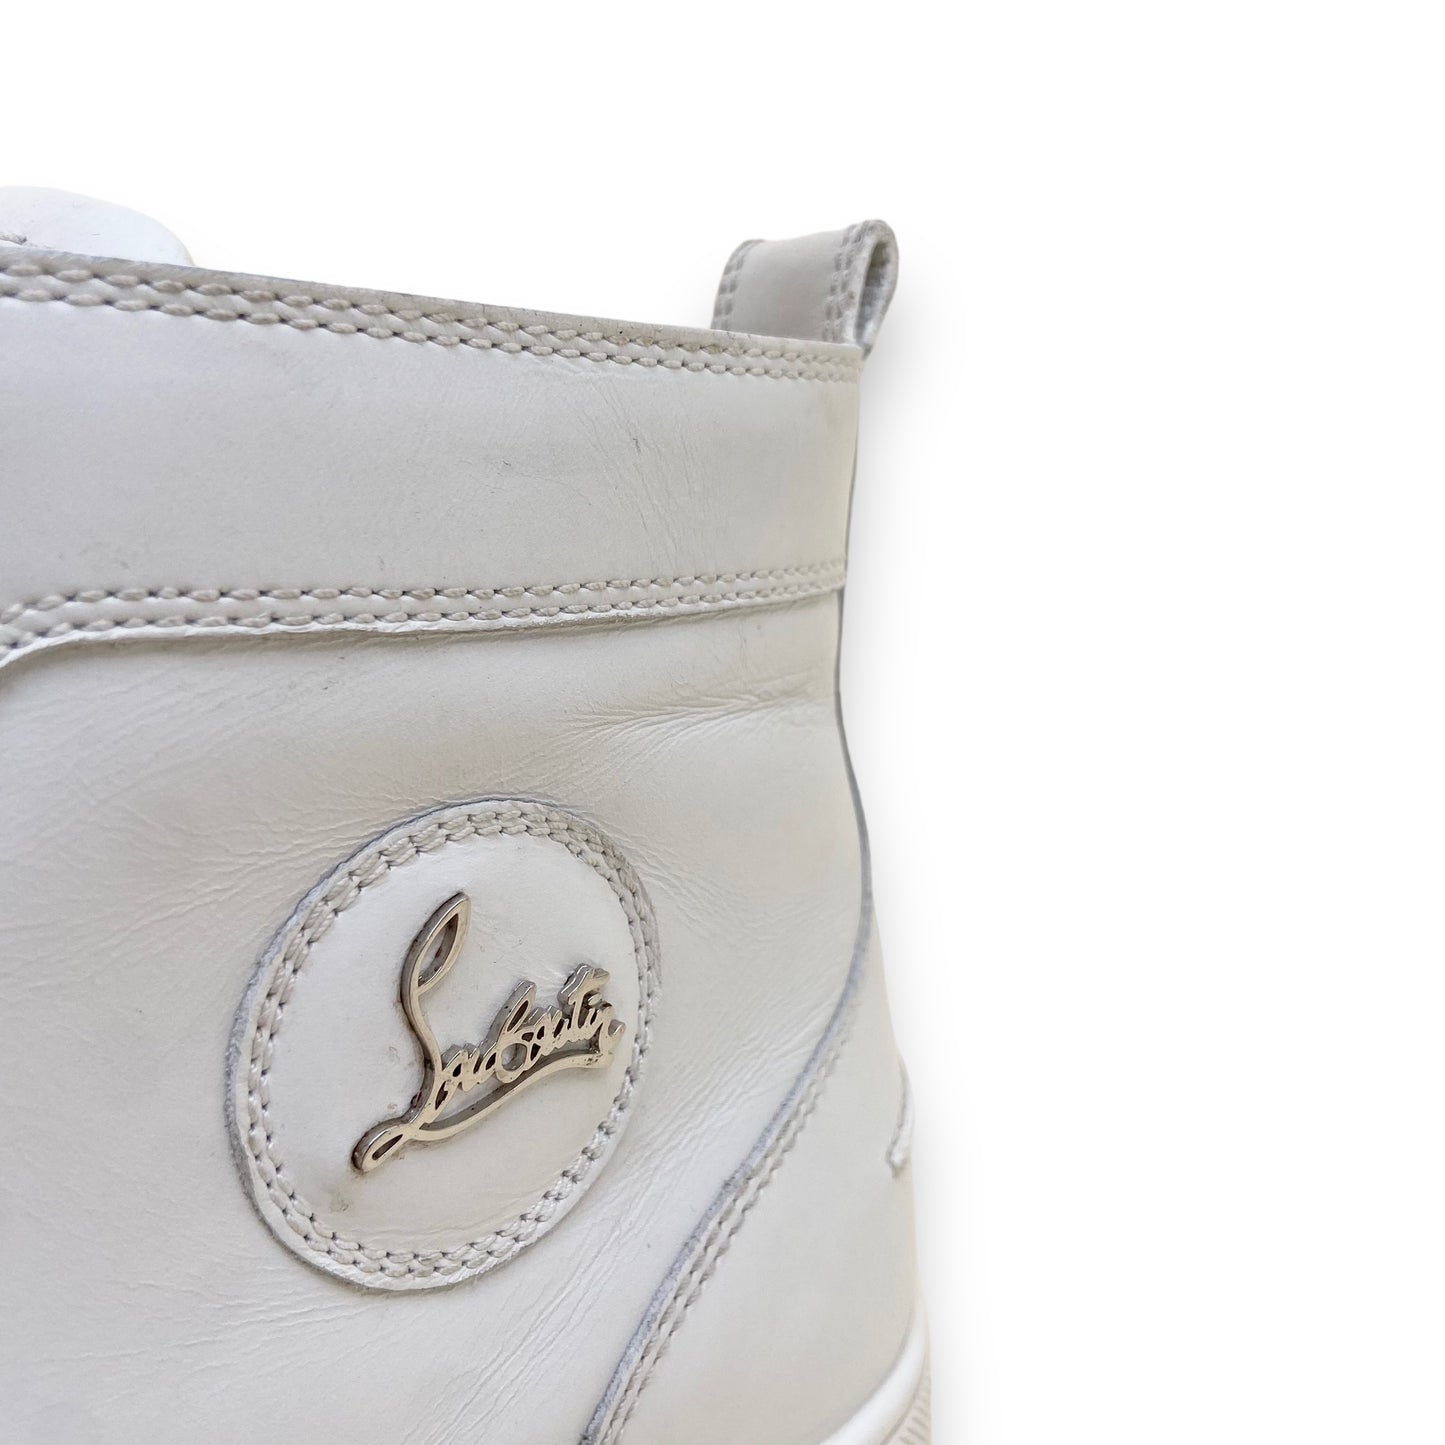 CHRISTIAN LOUBOUTIN LOUIS HIGH TOP LEATHER SNEAKERS WHITE UK10.5